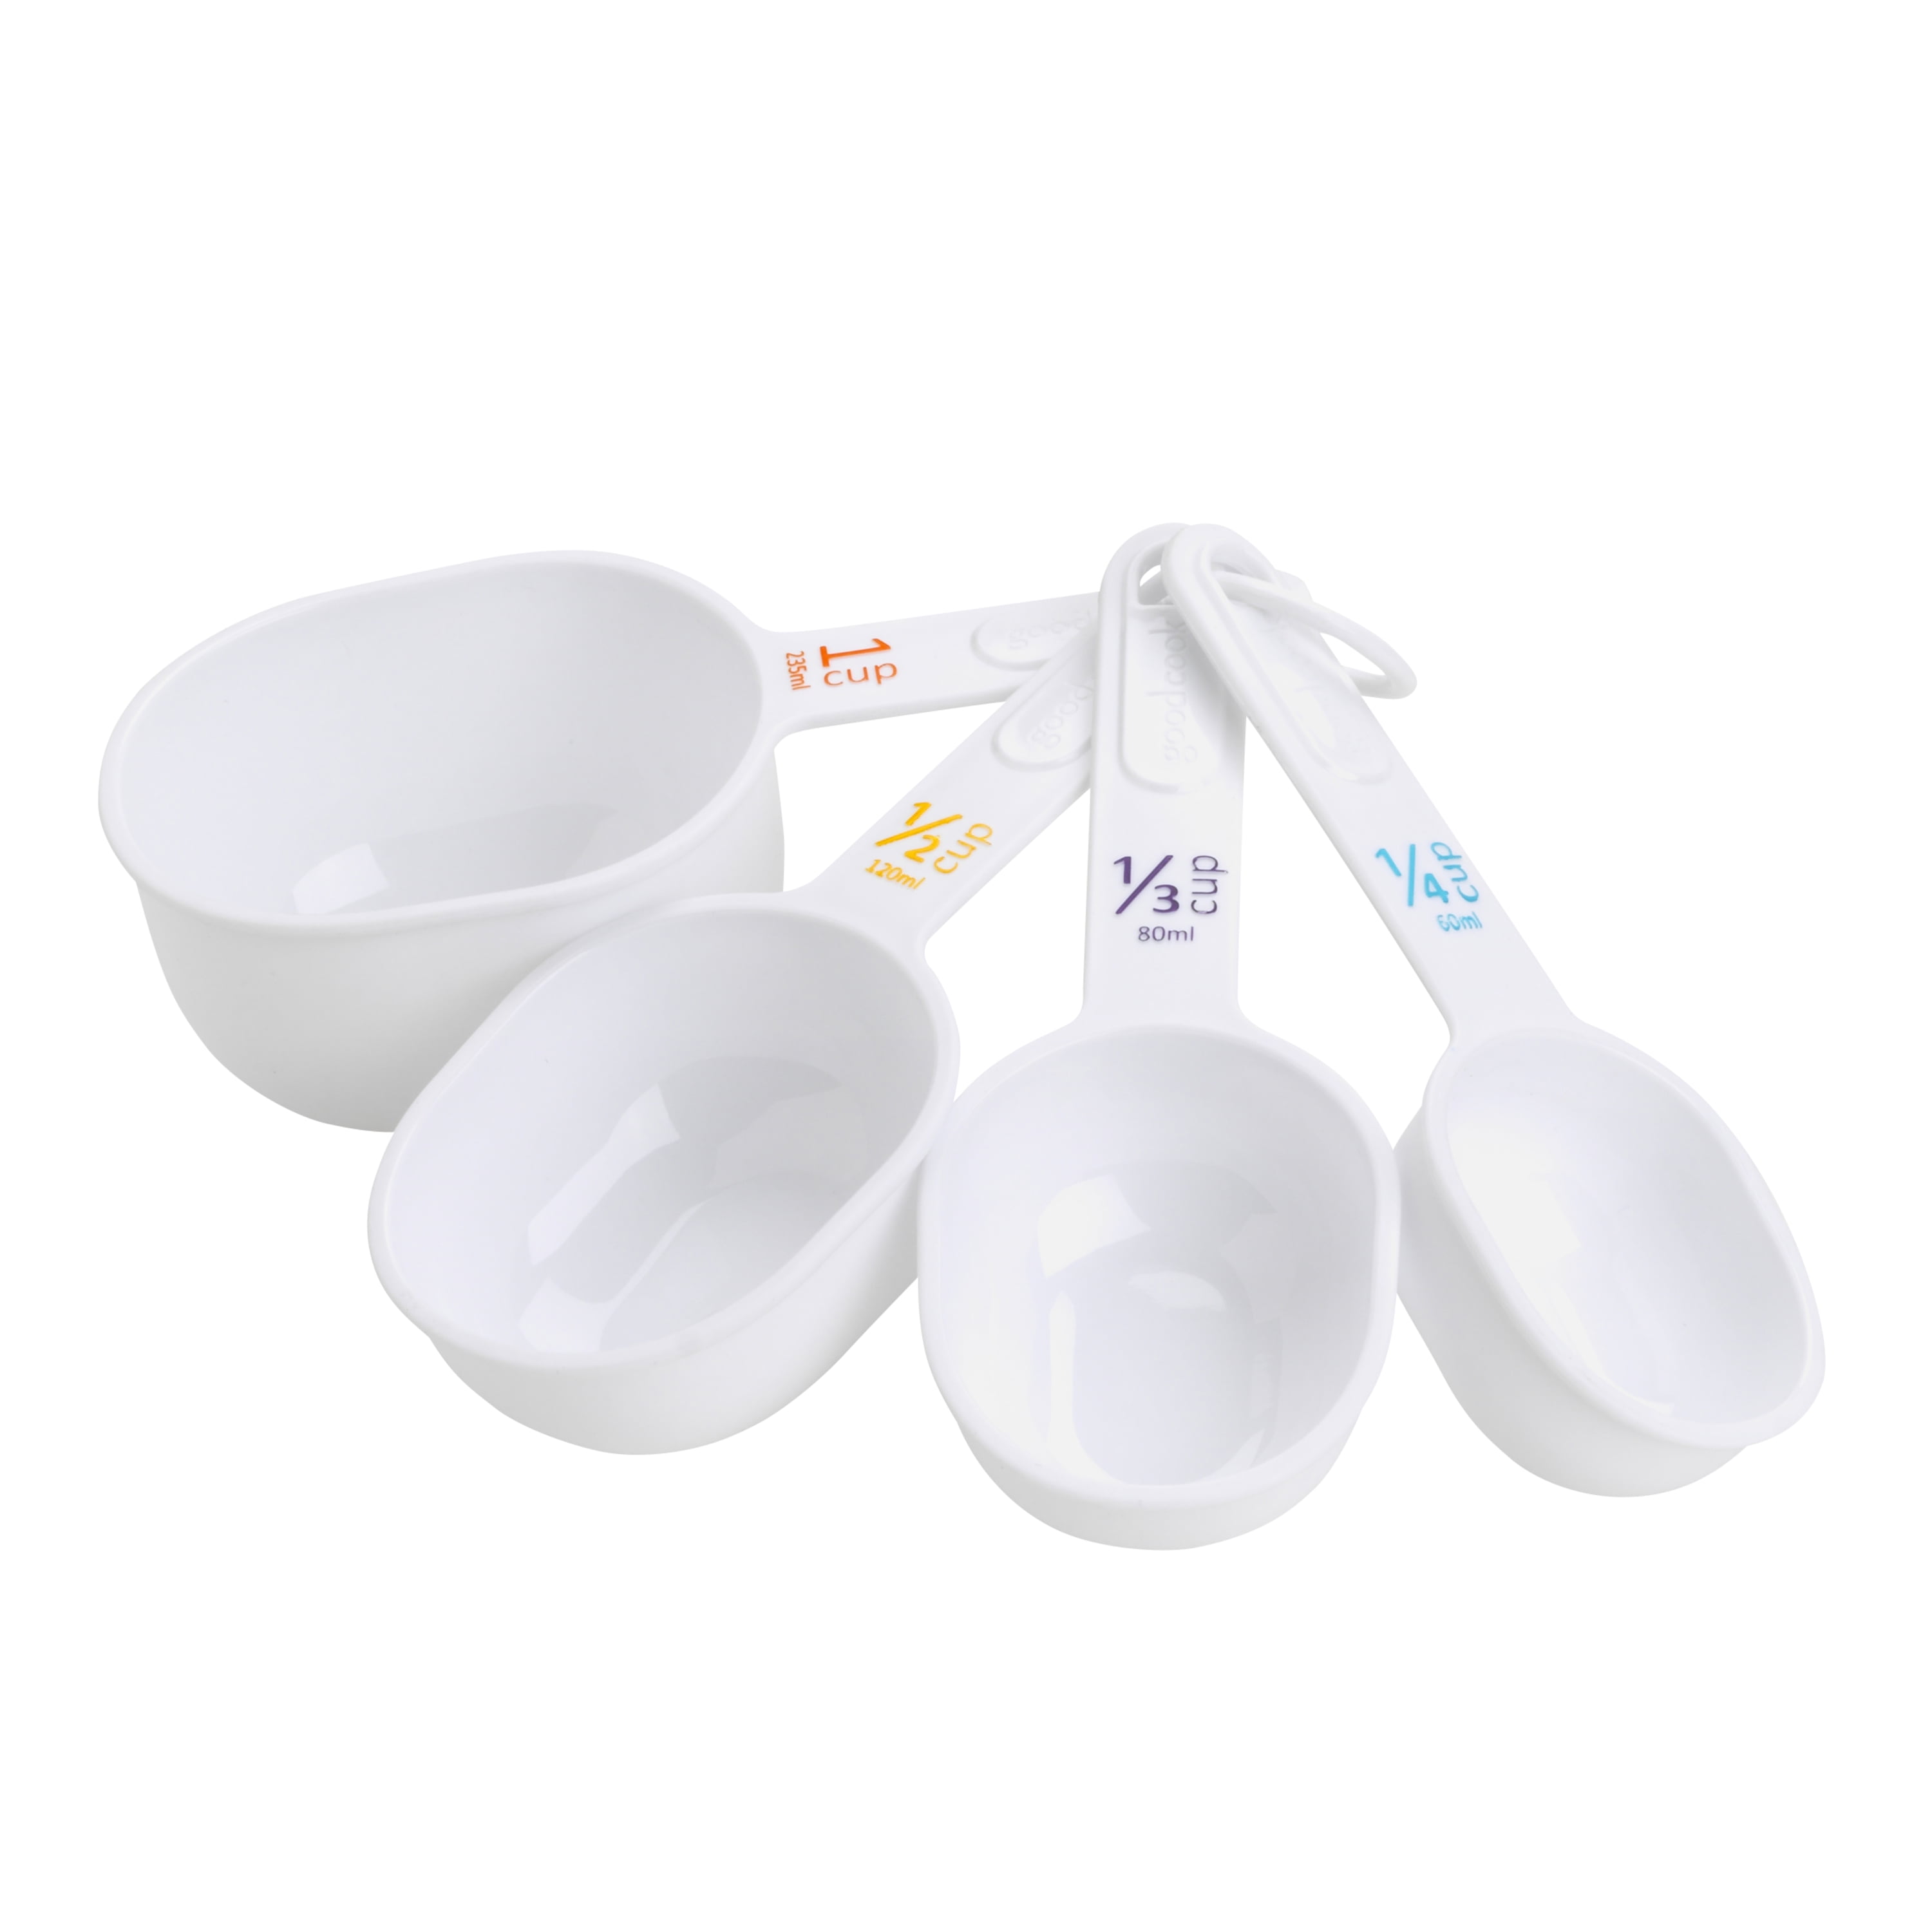 4 PC Measuring Cup Set, White Plastic - Lodging Kit Company